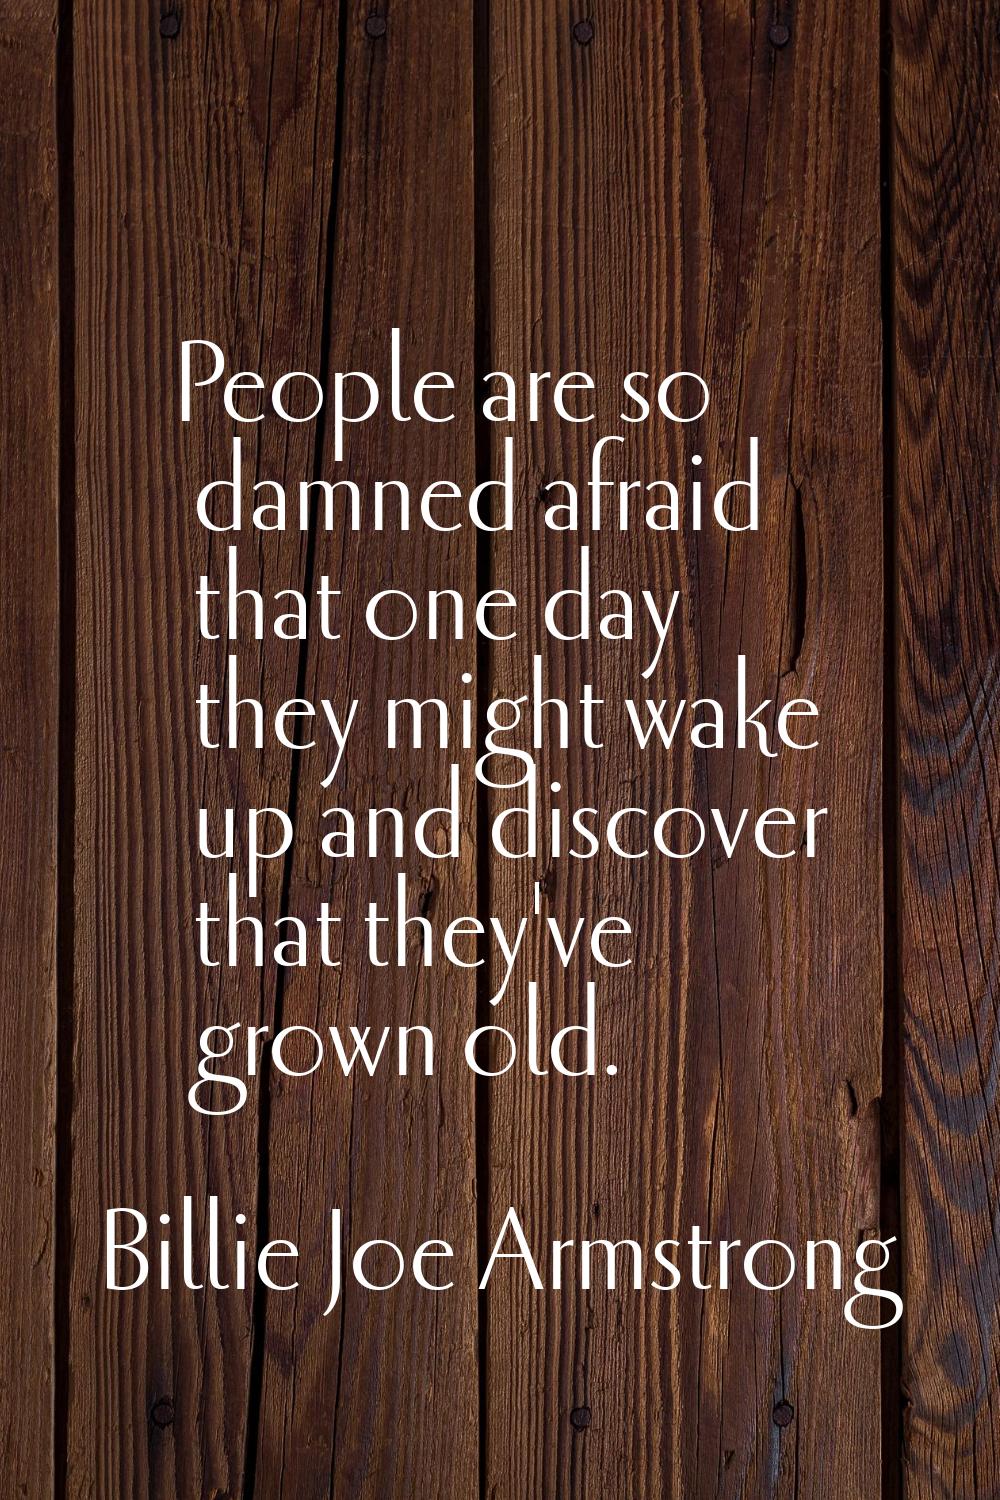 People are so damned afraid that one day they might wake up and discover that they've grown old.